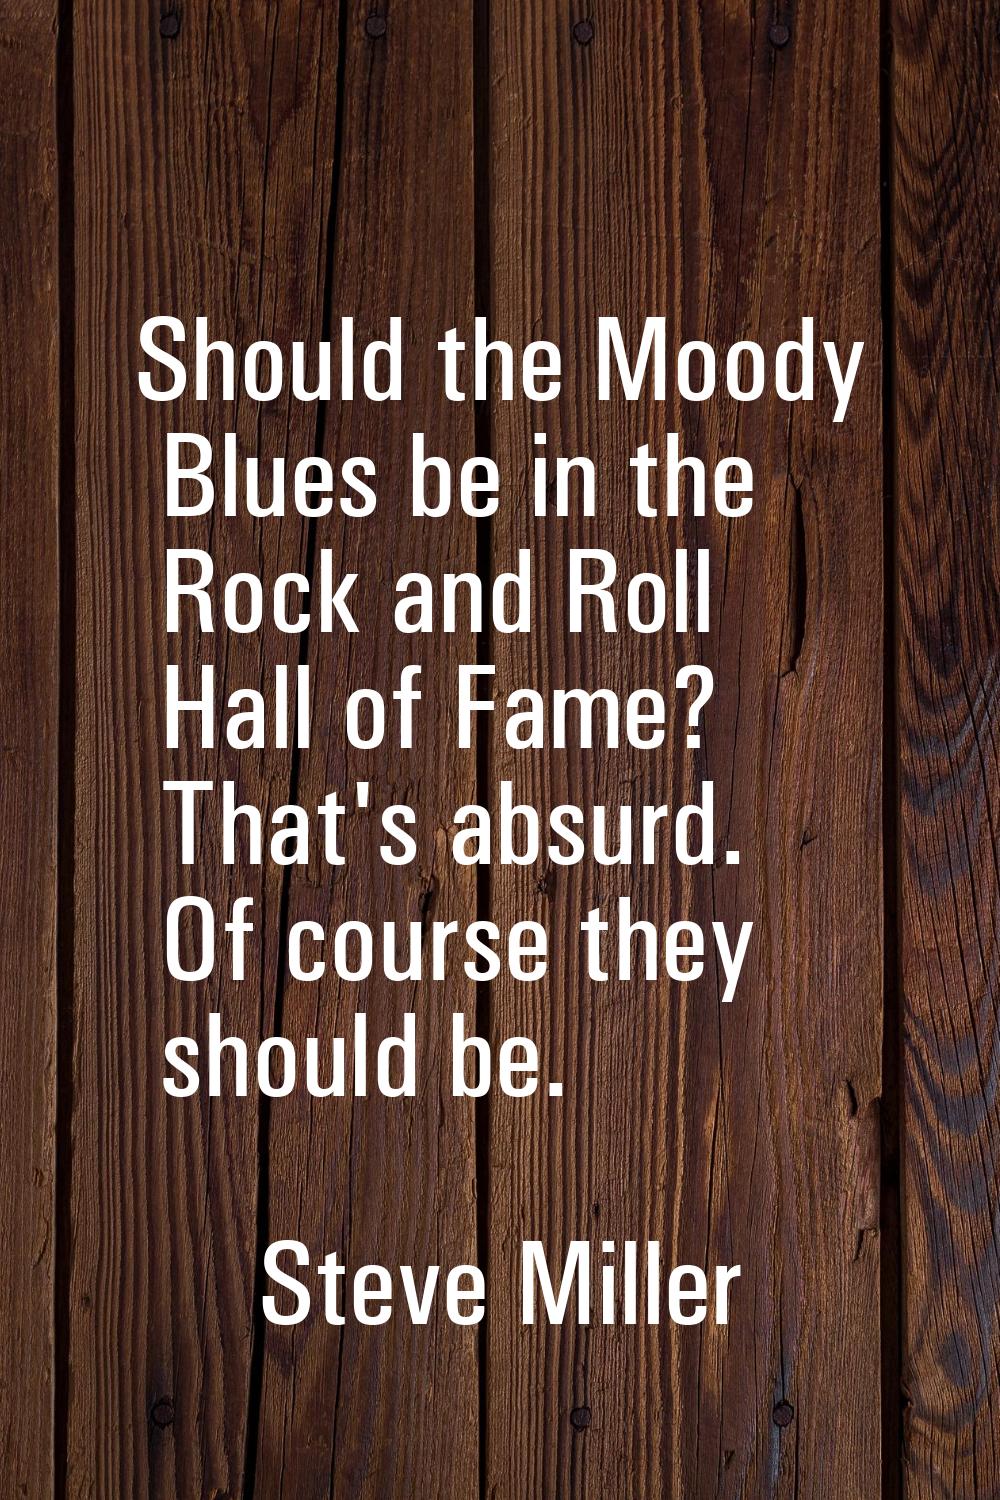 Should the Moody Blues be in the Rock and Roll Hall of Fame? That's absurd. Of course they should b